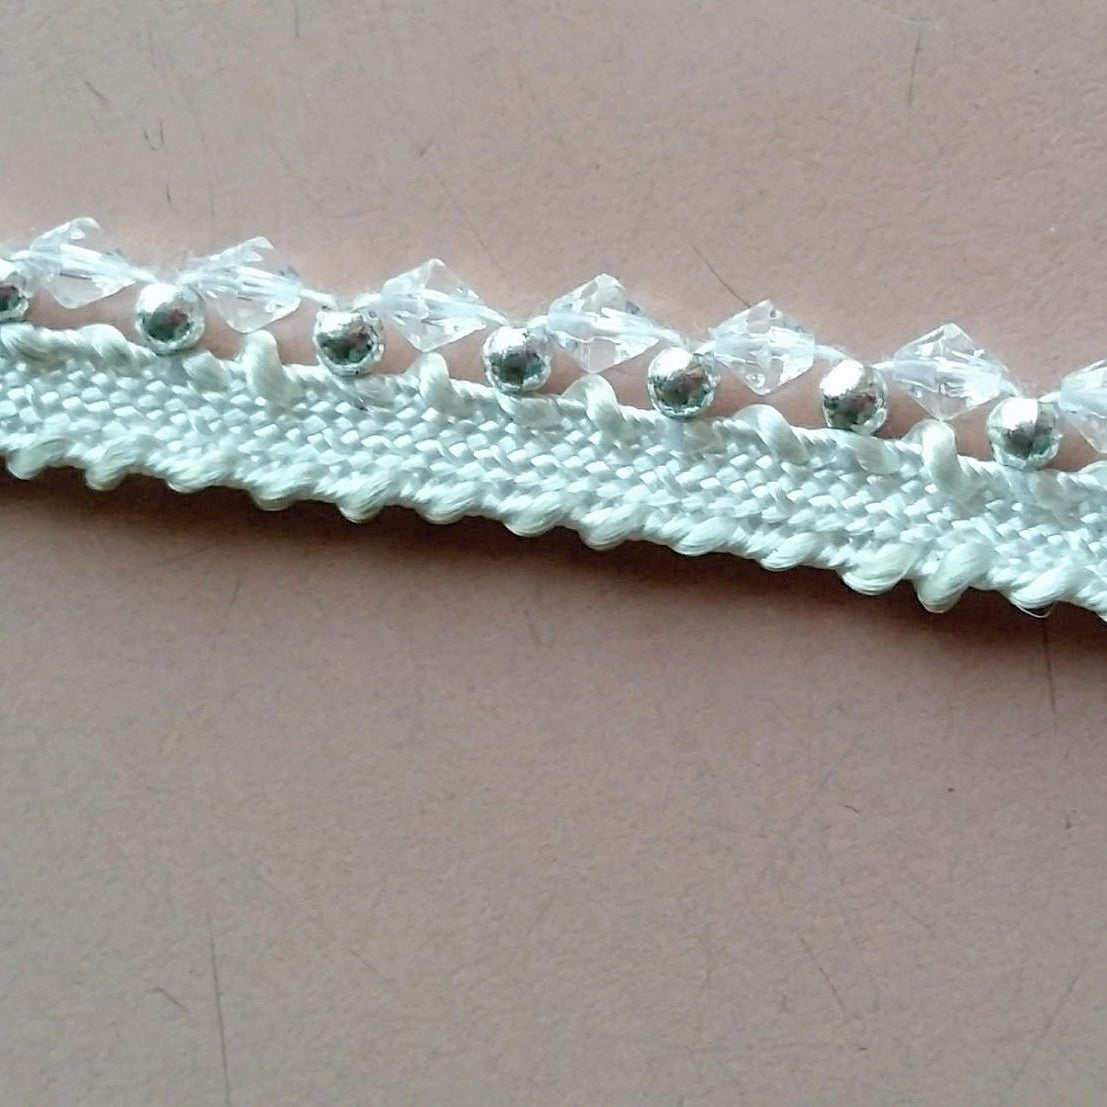 White Thread Trim Embellished With Clear And Silver Beads, Beaded Trim, Approx. 12 mm wide - 200317L408